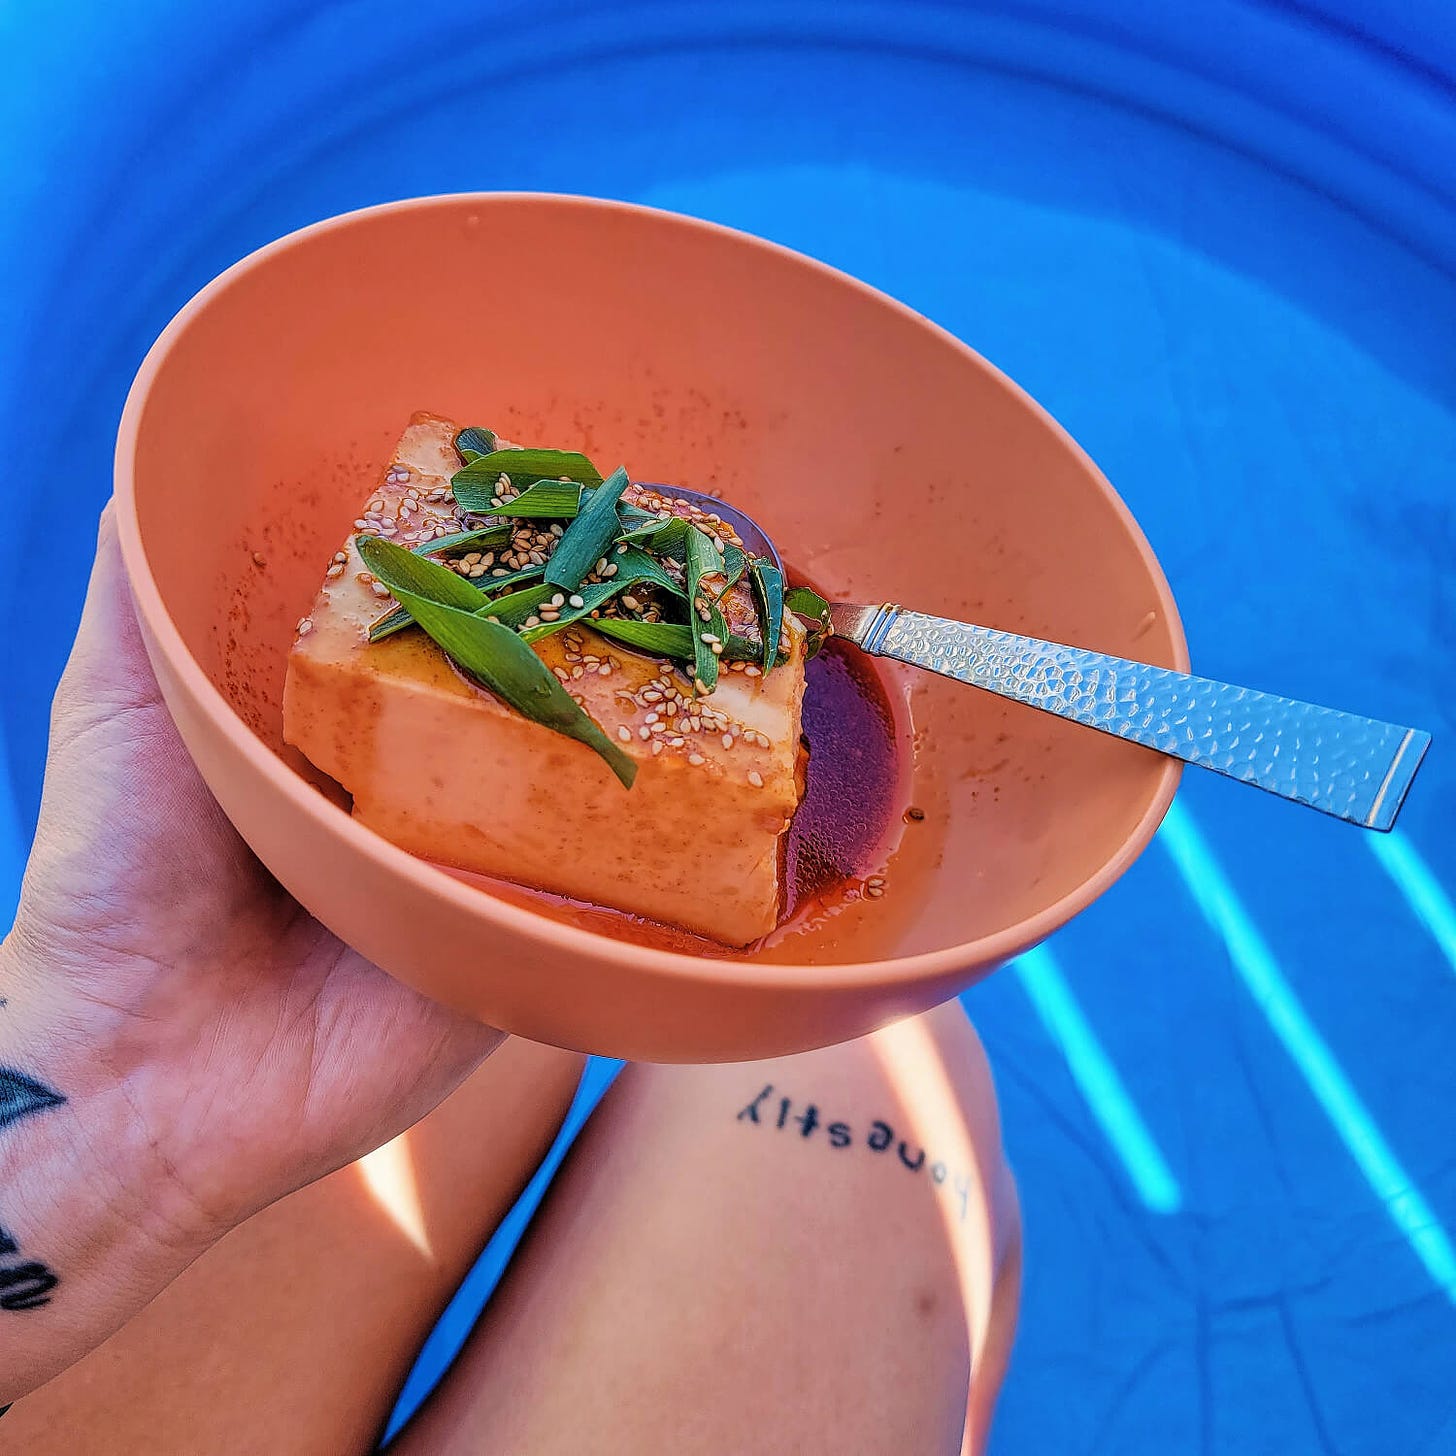 a block of silken tofu doused in a red gochujang sauce, topped with sliced green onions and toasted sesame seeds. grace is enjoying this in a plastic bowl with their feet dipped into a small inflatable backyard pool.